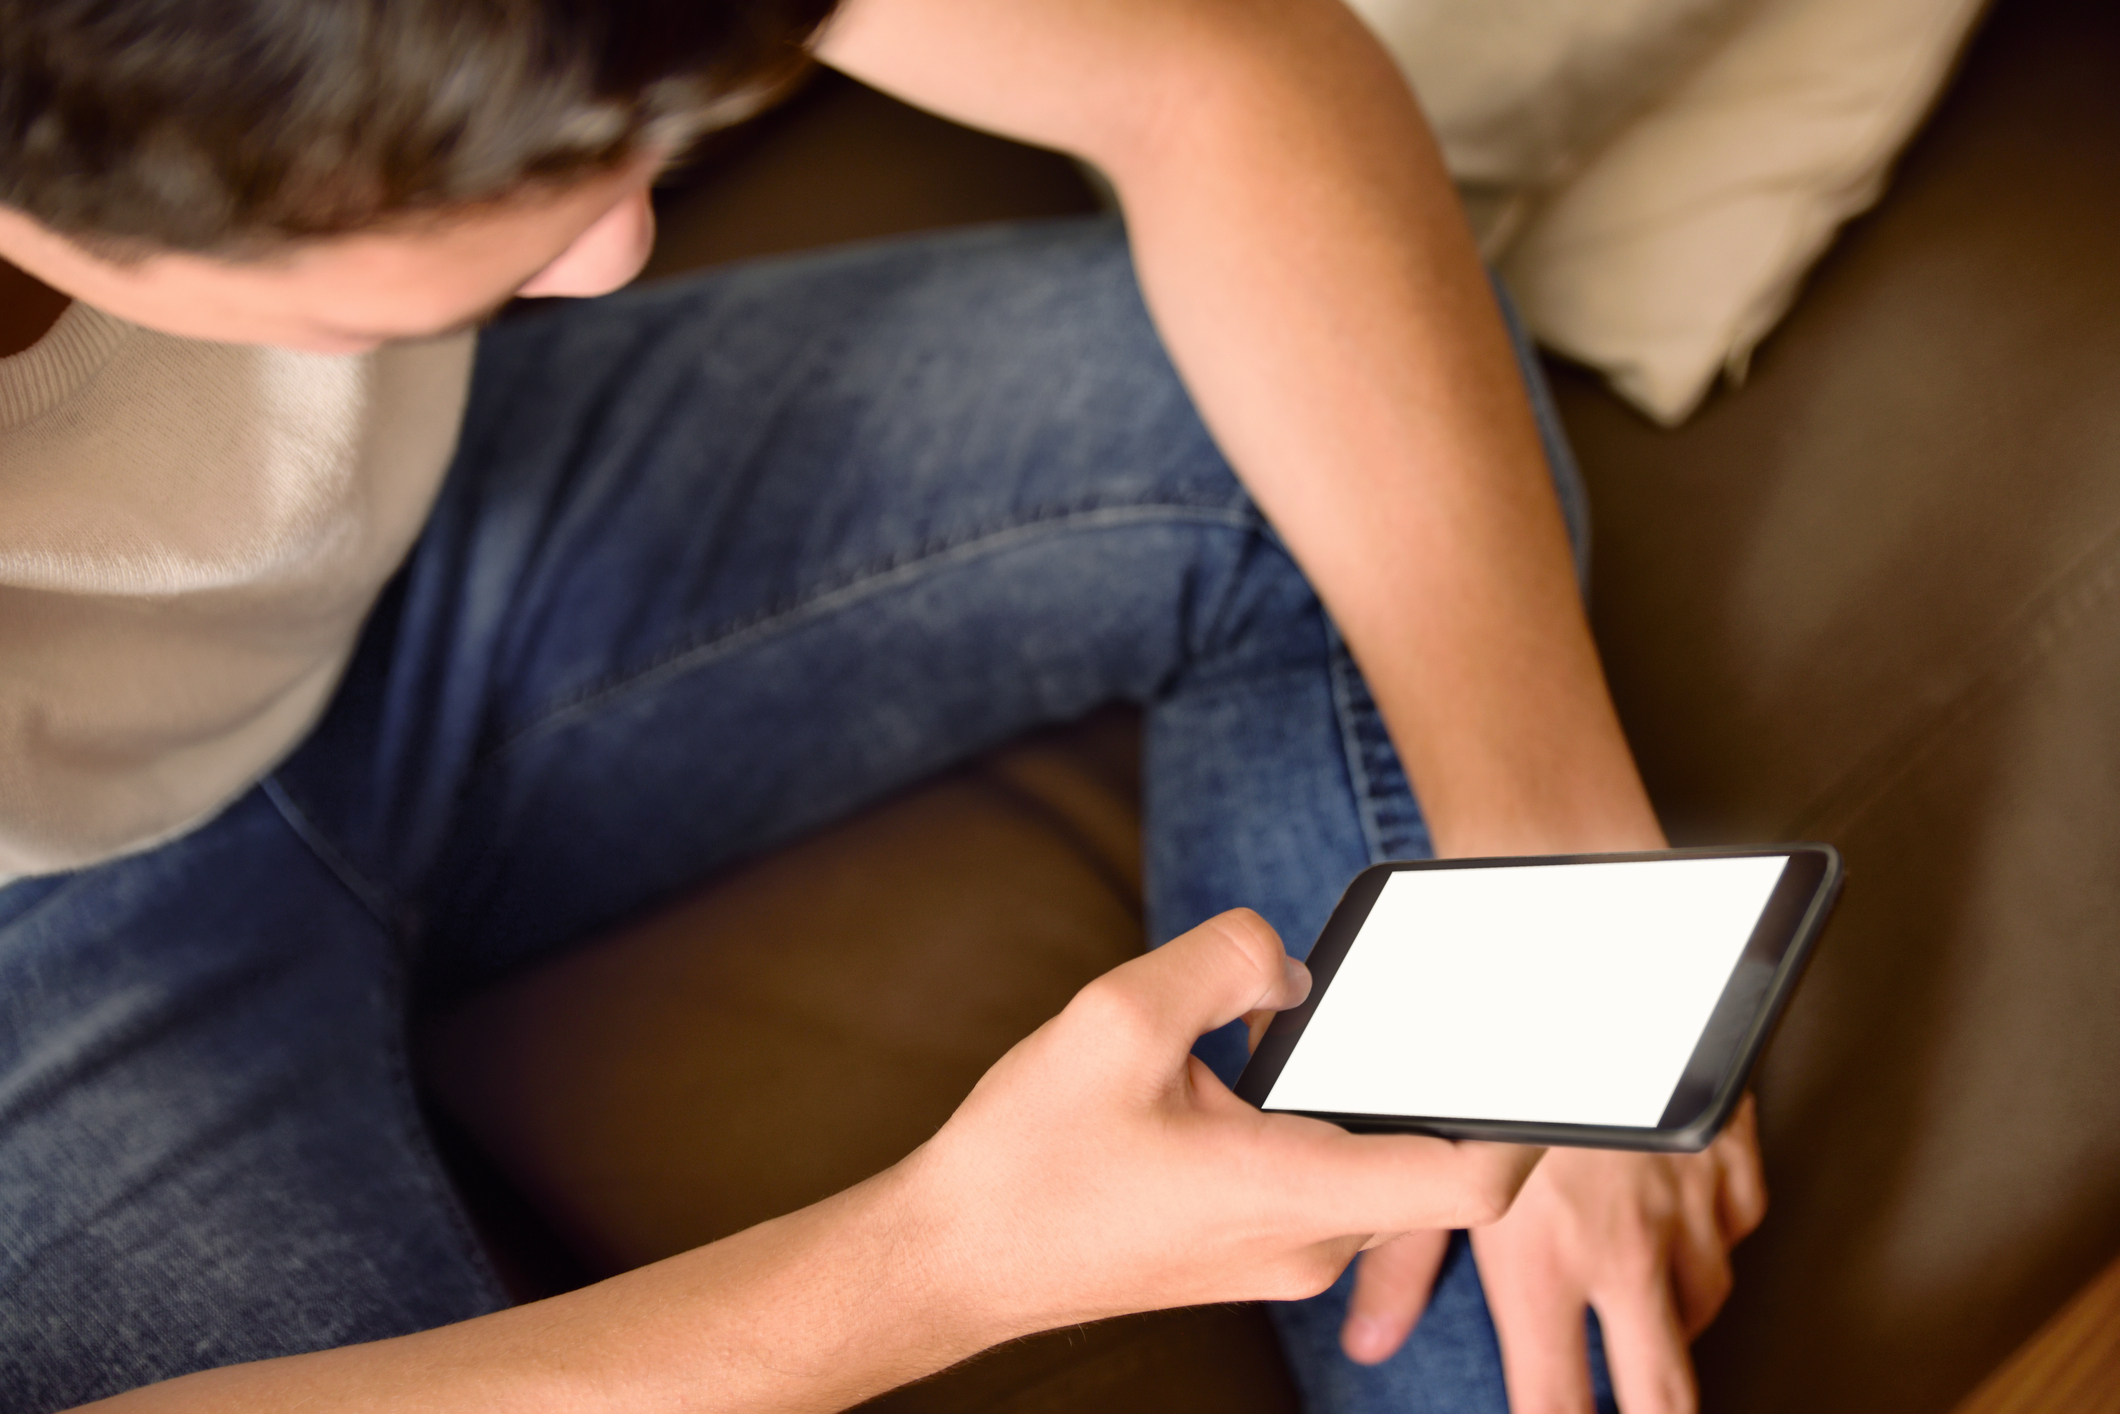 Young boy on a couch using a smartphone in the living room.